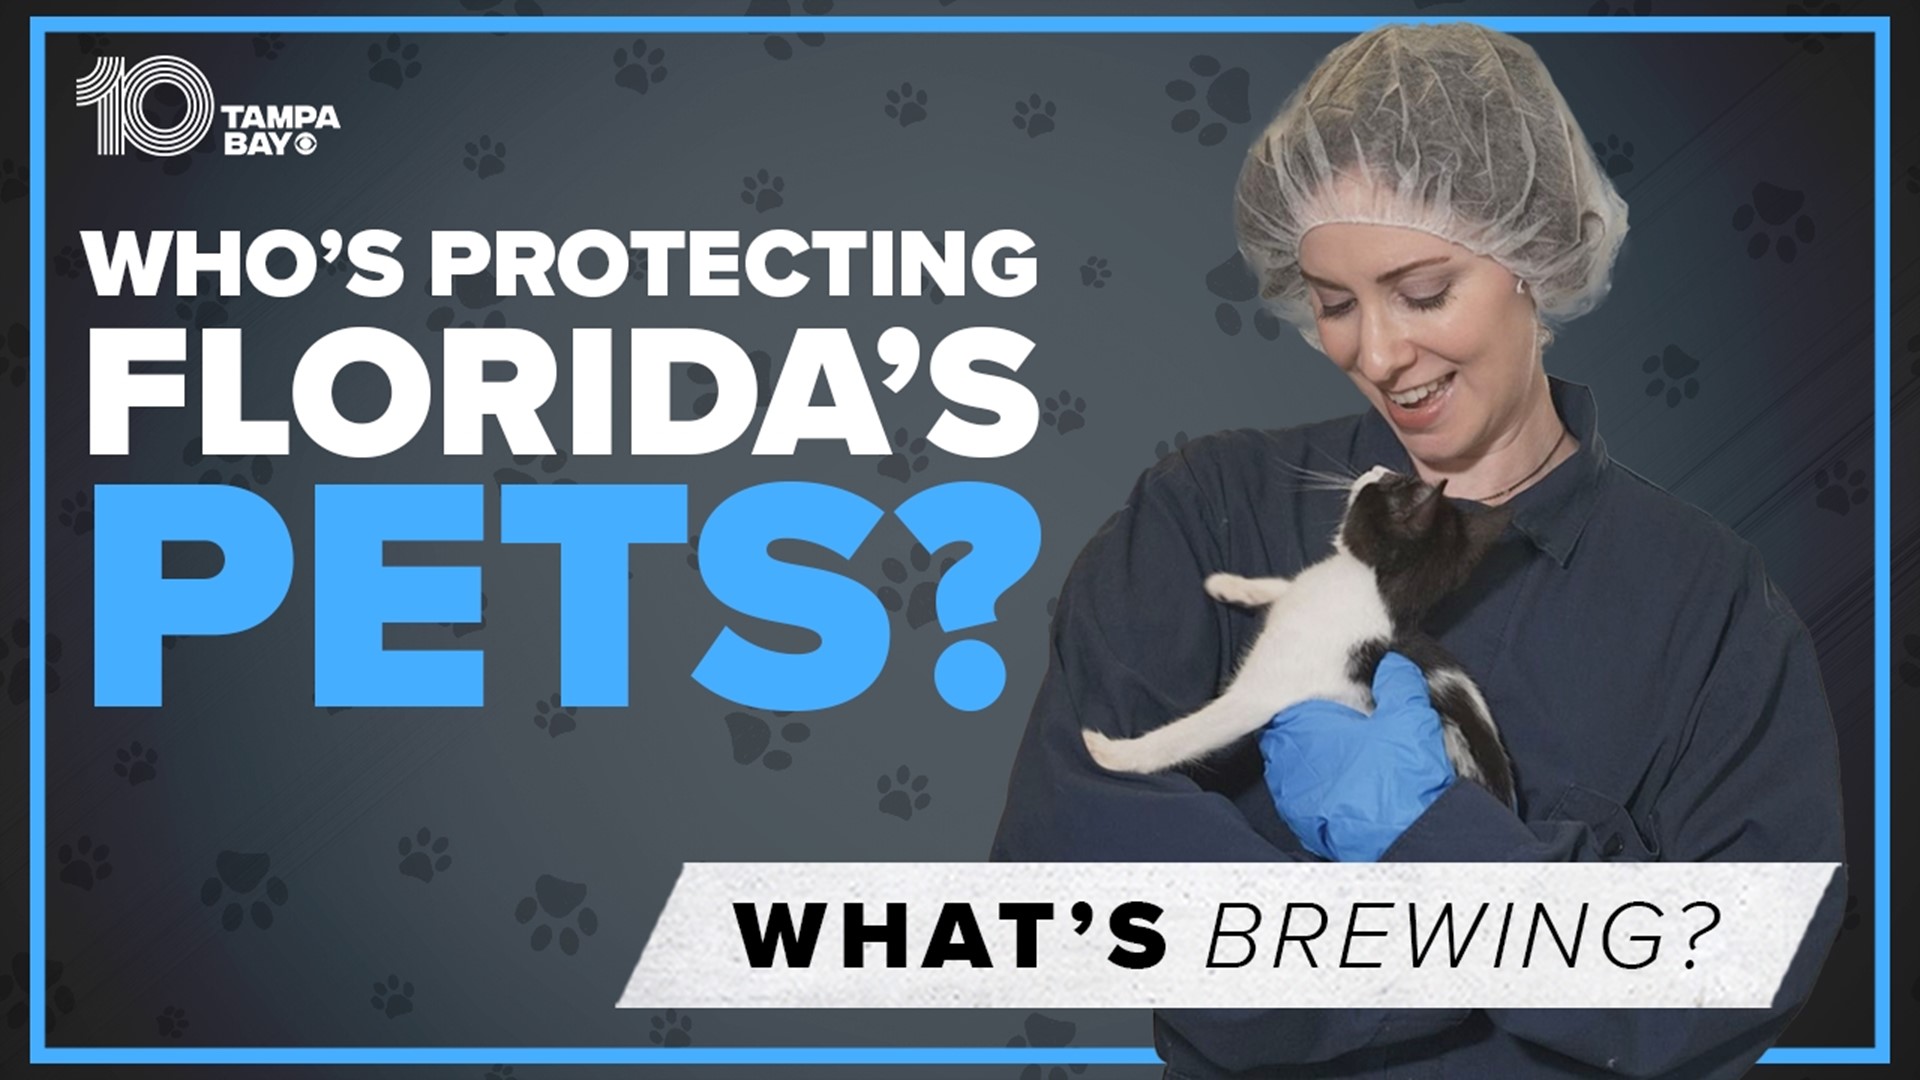 After a massive animal hoarding bust in Polk County, 10 Investigates found that proposed laws to protect animals consistently go nowhere in the Florida Legislature.